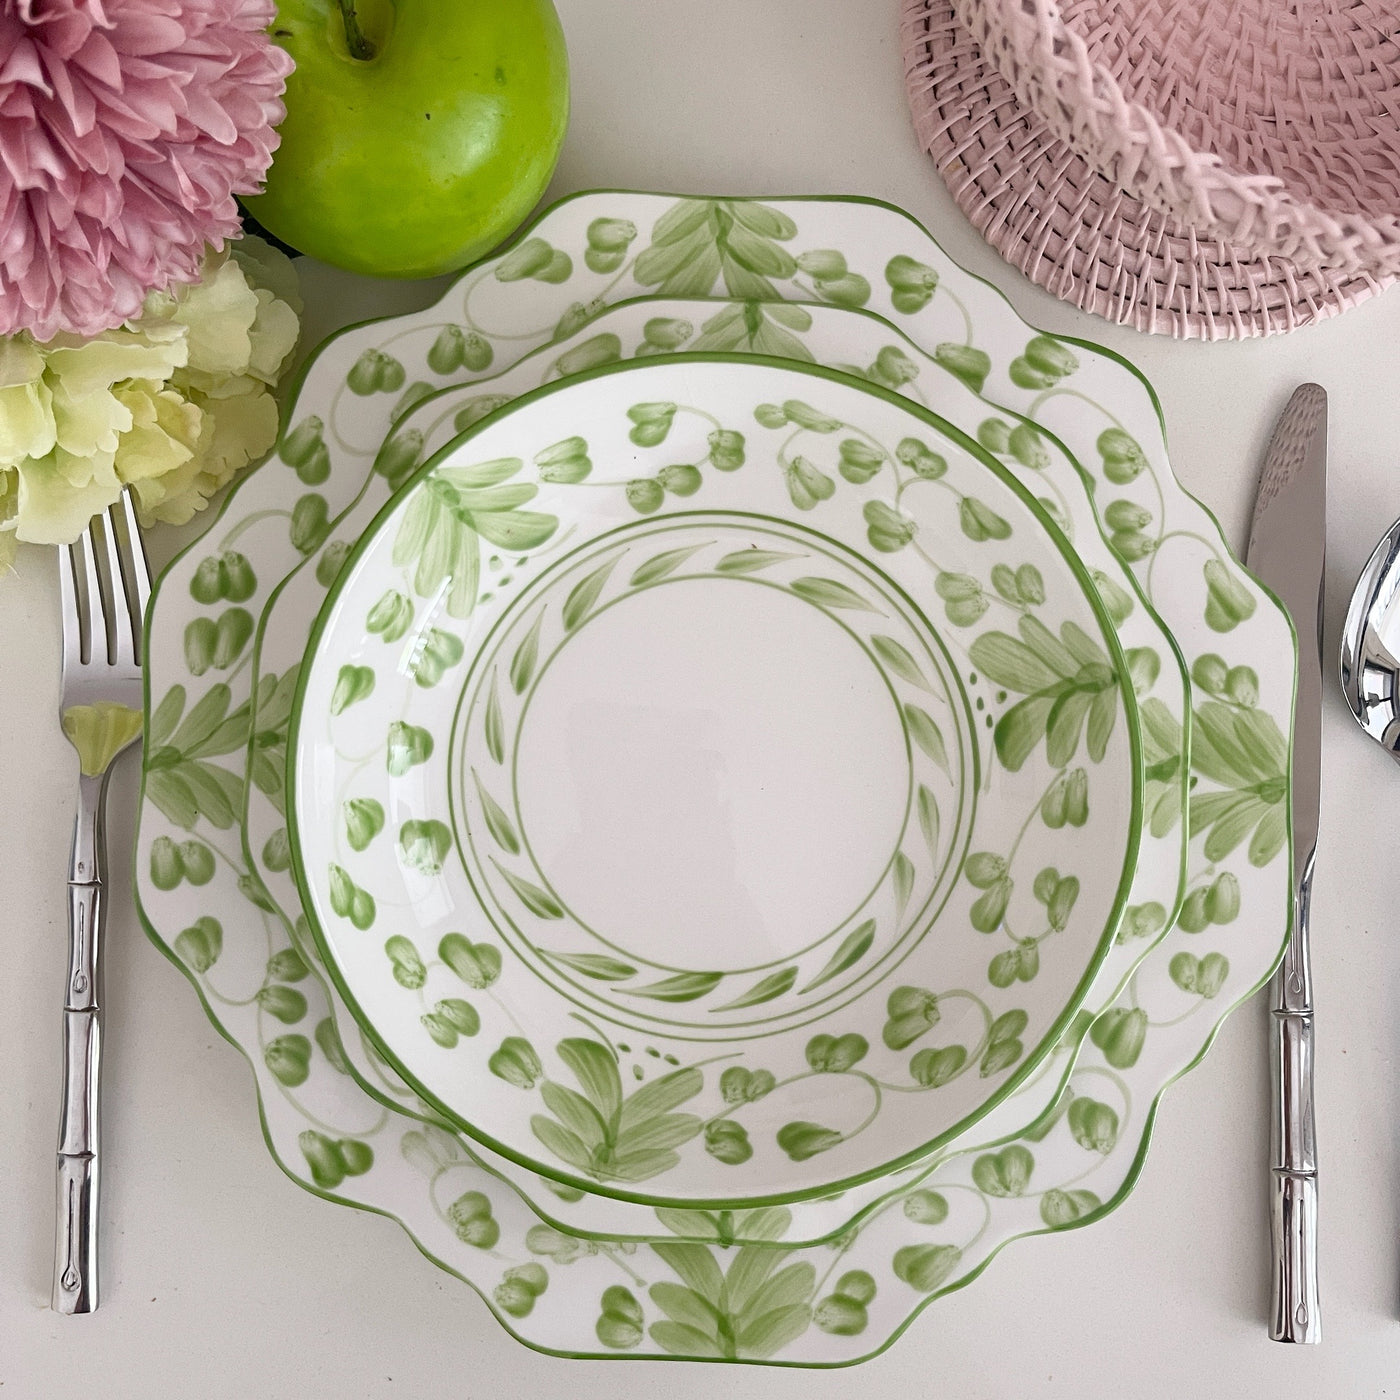 12pc (4 Person) 'Lily' Dinner Set - Green